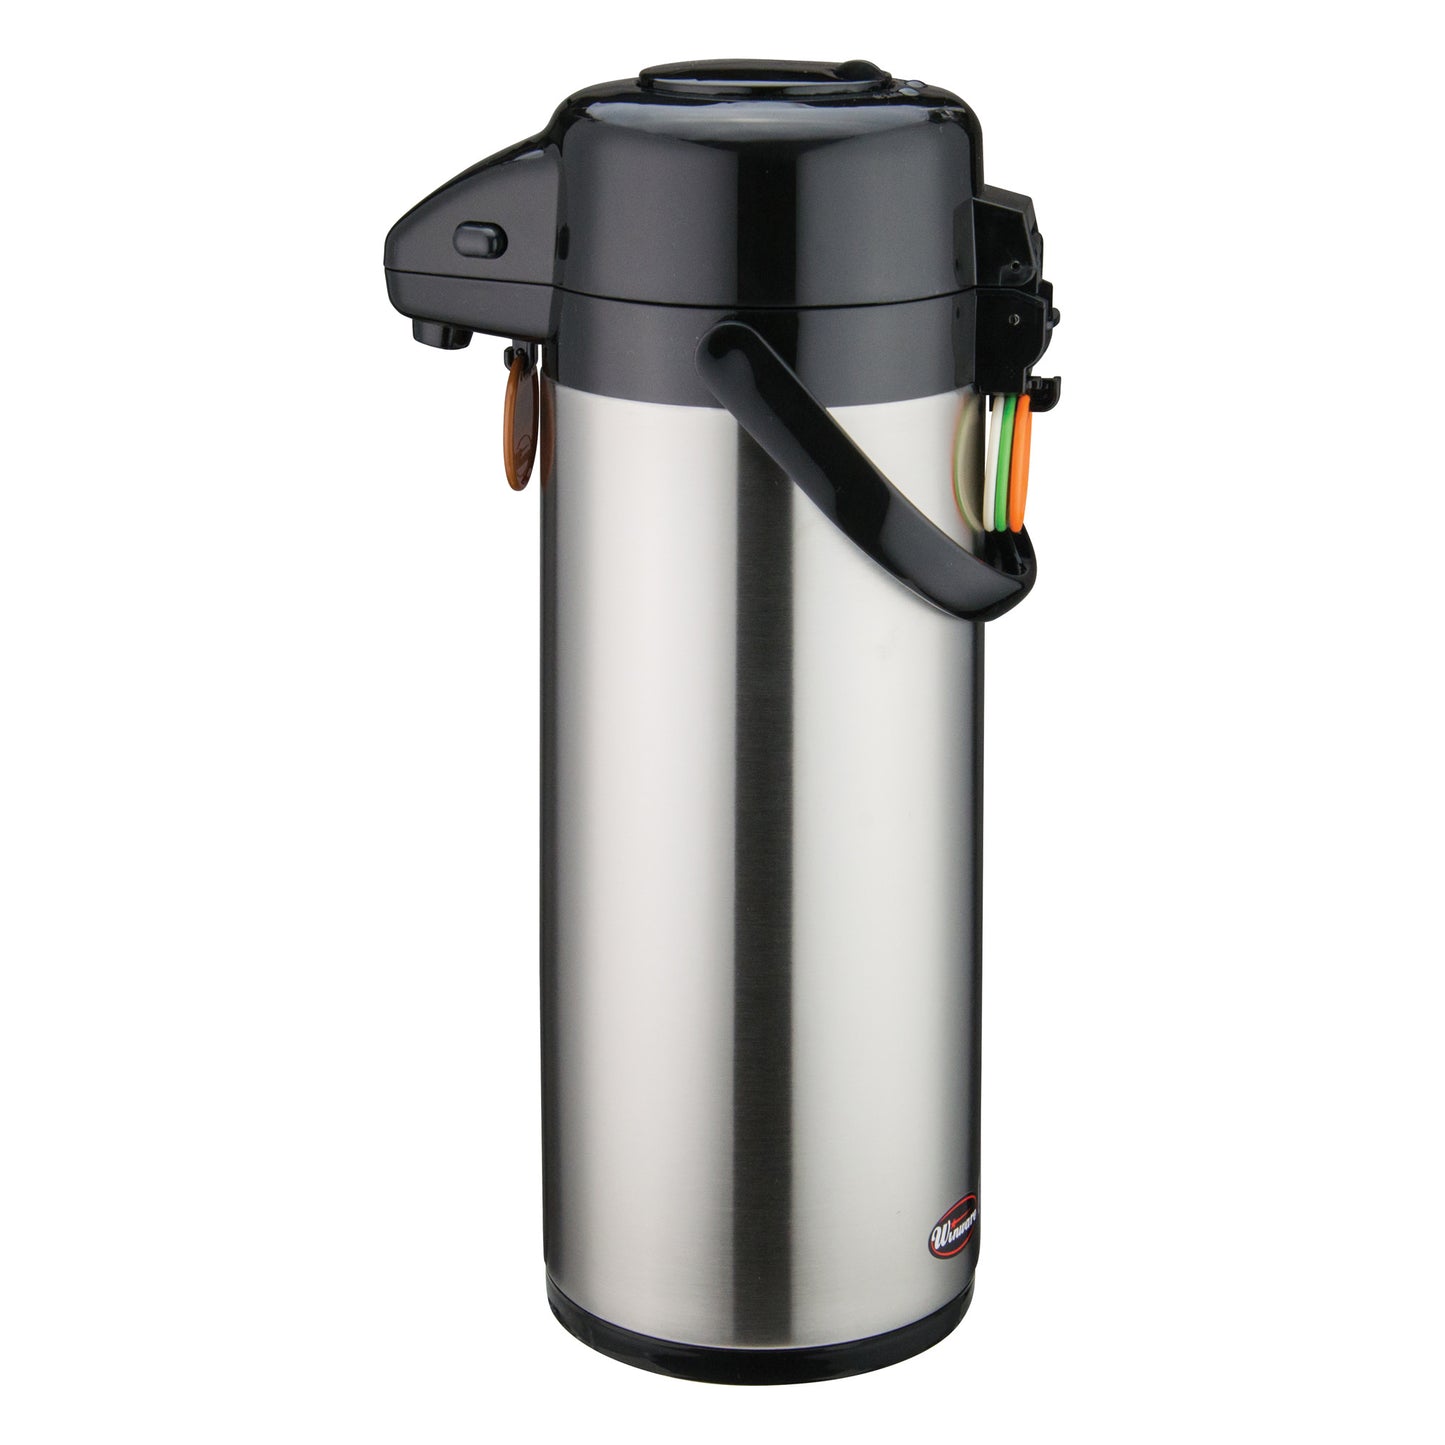 APSP-930 - Stainless Steel Lined Airpot, Push Button - 3 Liter